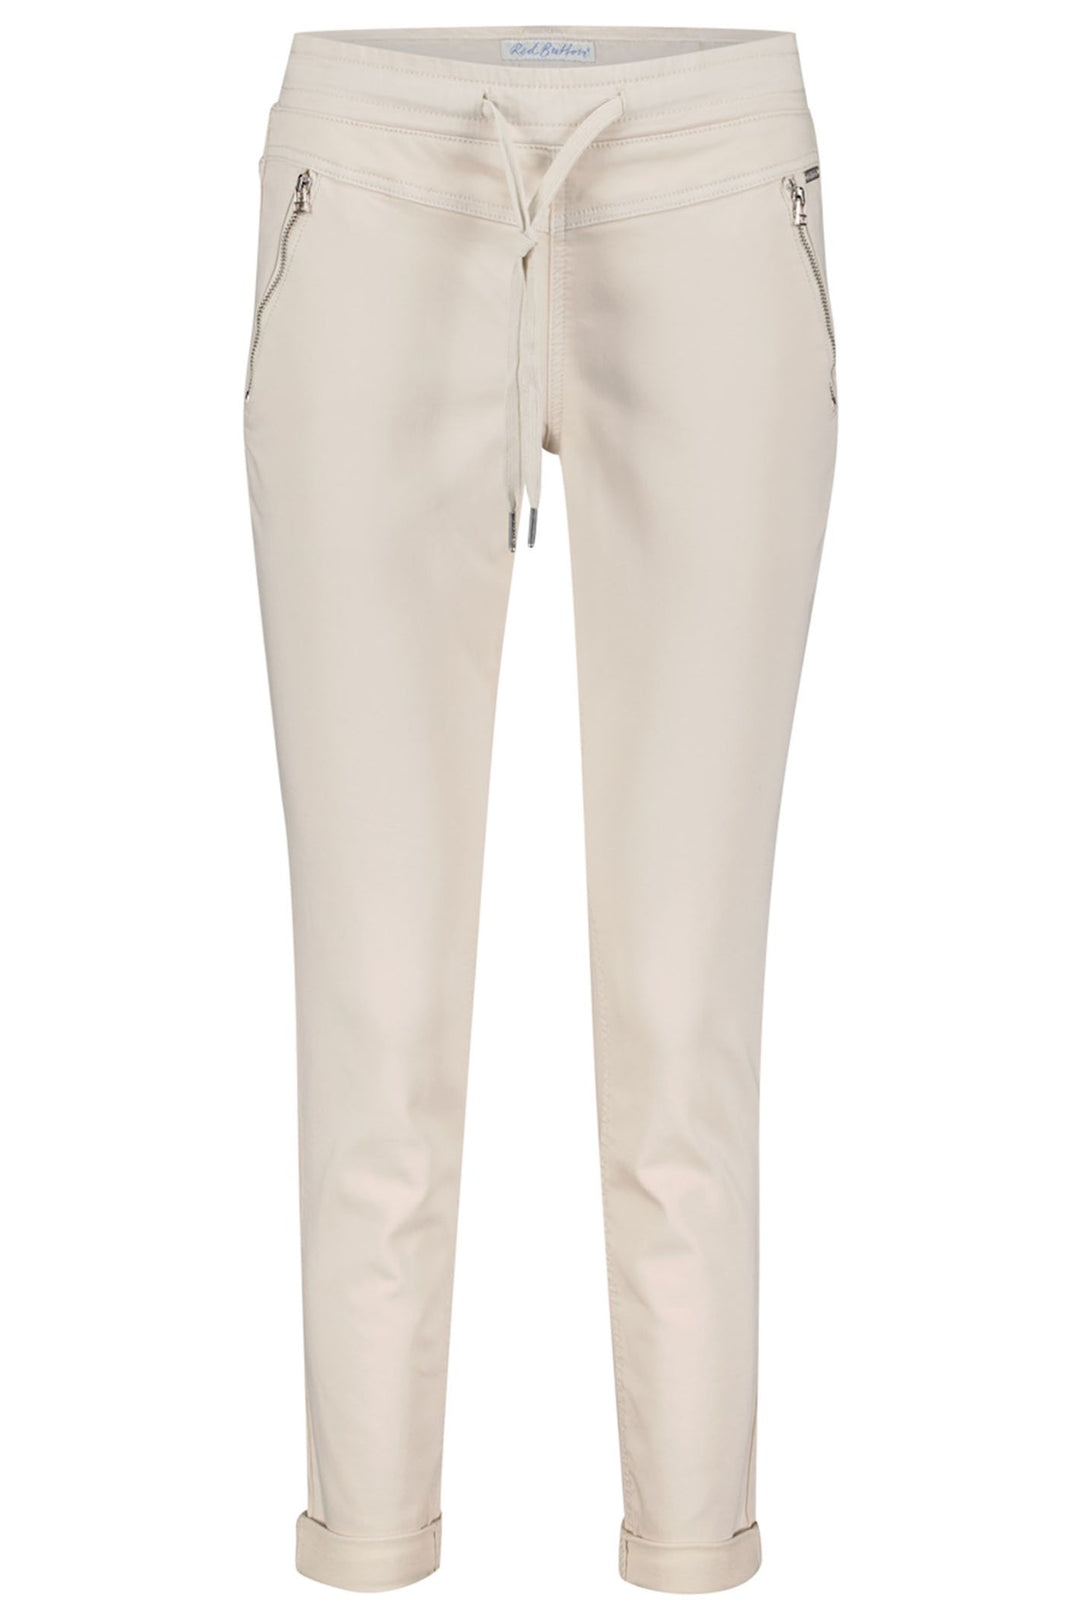 Red Button SRB3936 Tessy Kit Beige Crop Jogger Trousers - Dotique